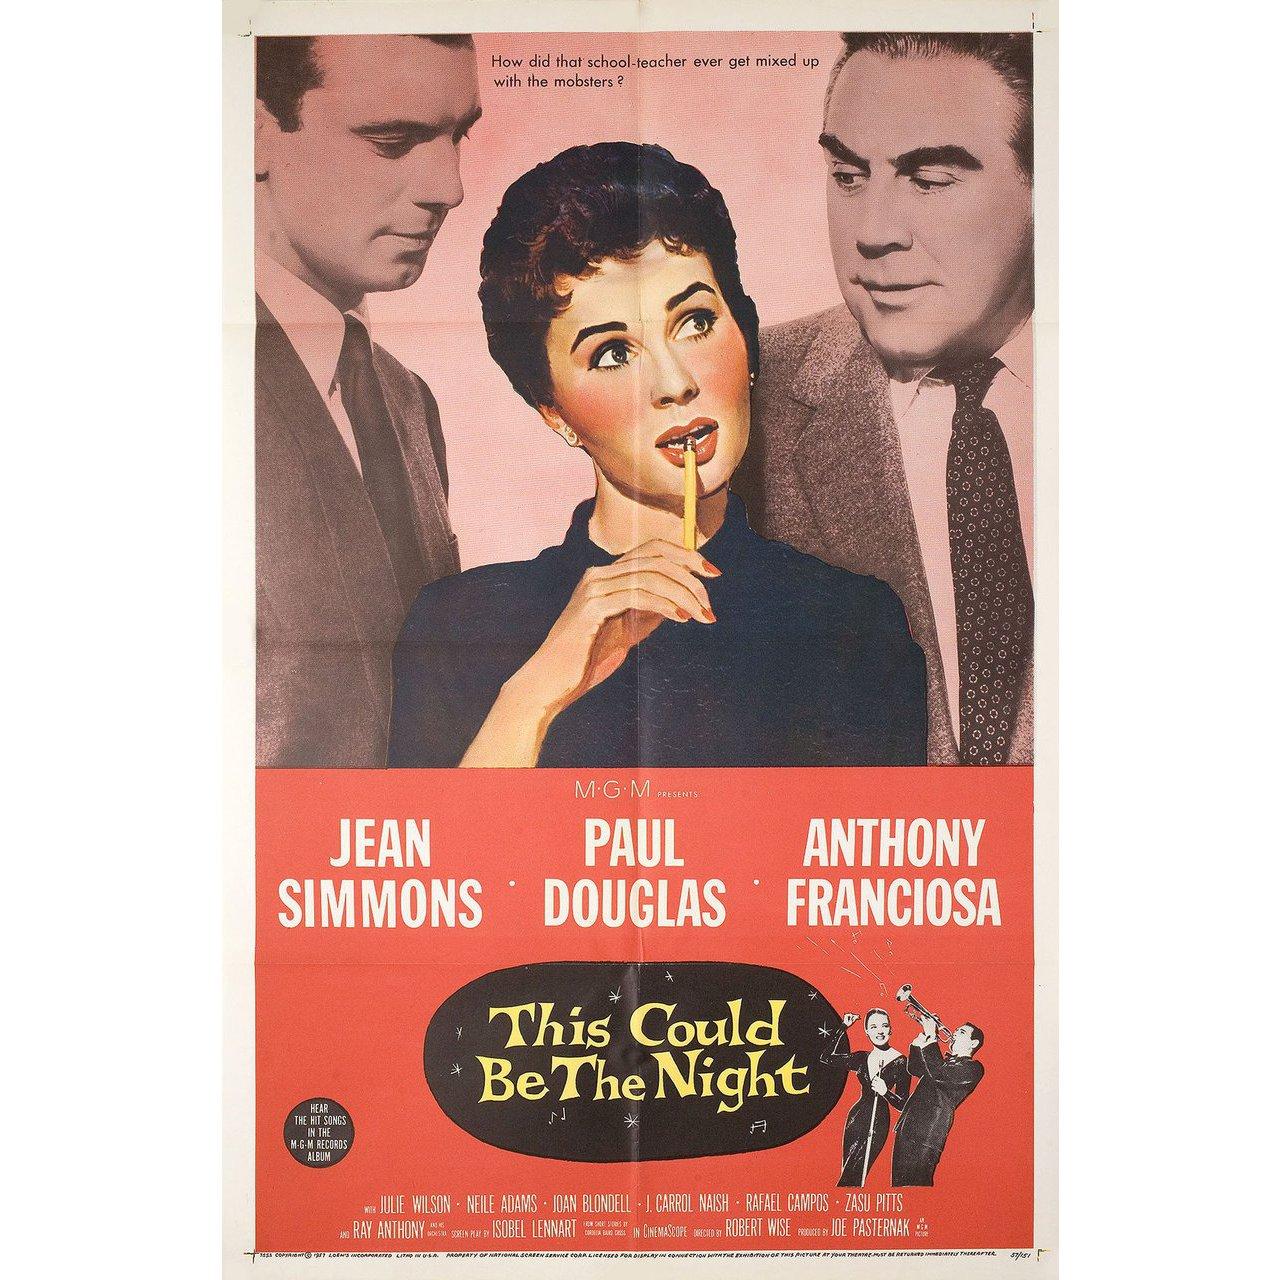 Original 1957 U.S. one sheet poster for the film This Could Be the Night directed by Robert Wise with Jean Simmons / Paul Douglas / Anthony Franciosa / Julie Wilson. Very good-fine condition, folded. Many original posters were issued folded or were